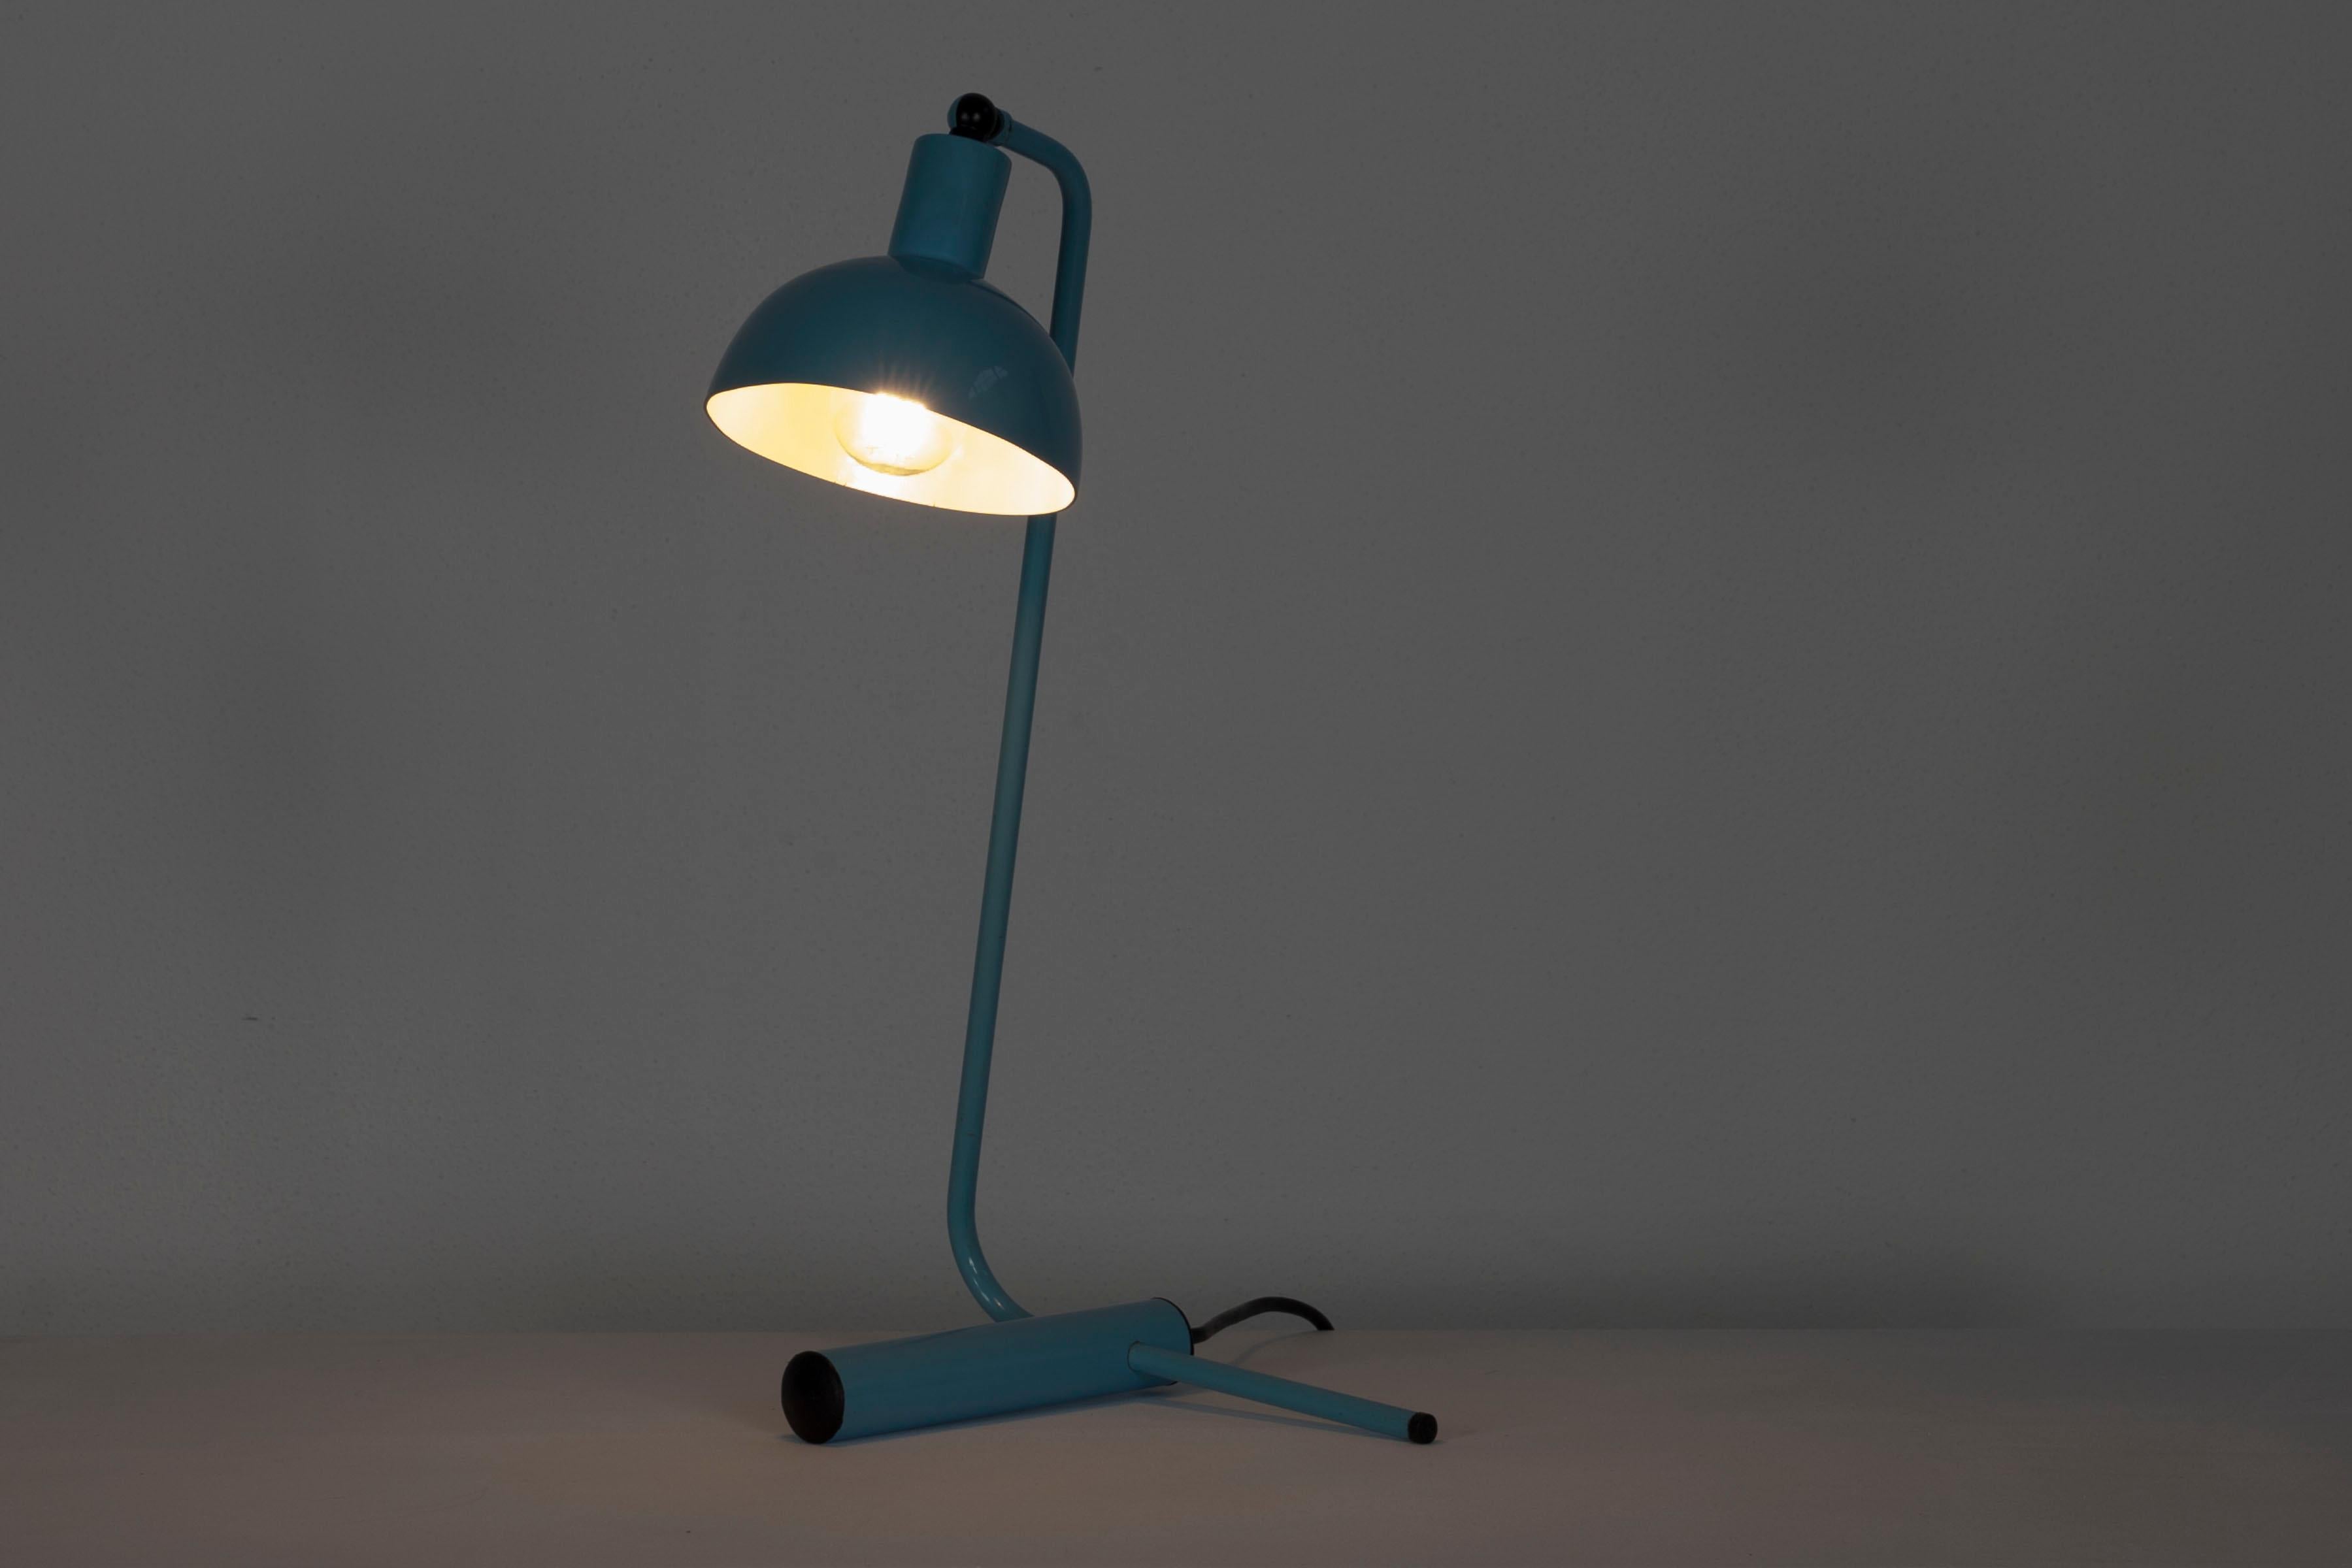 Light blue italien table lamp from the 1960s. Made from metal and aluminum. The lampshade can be adjusted to different positions.